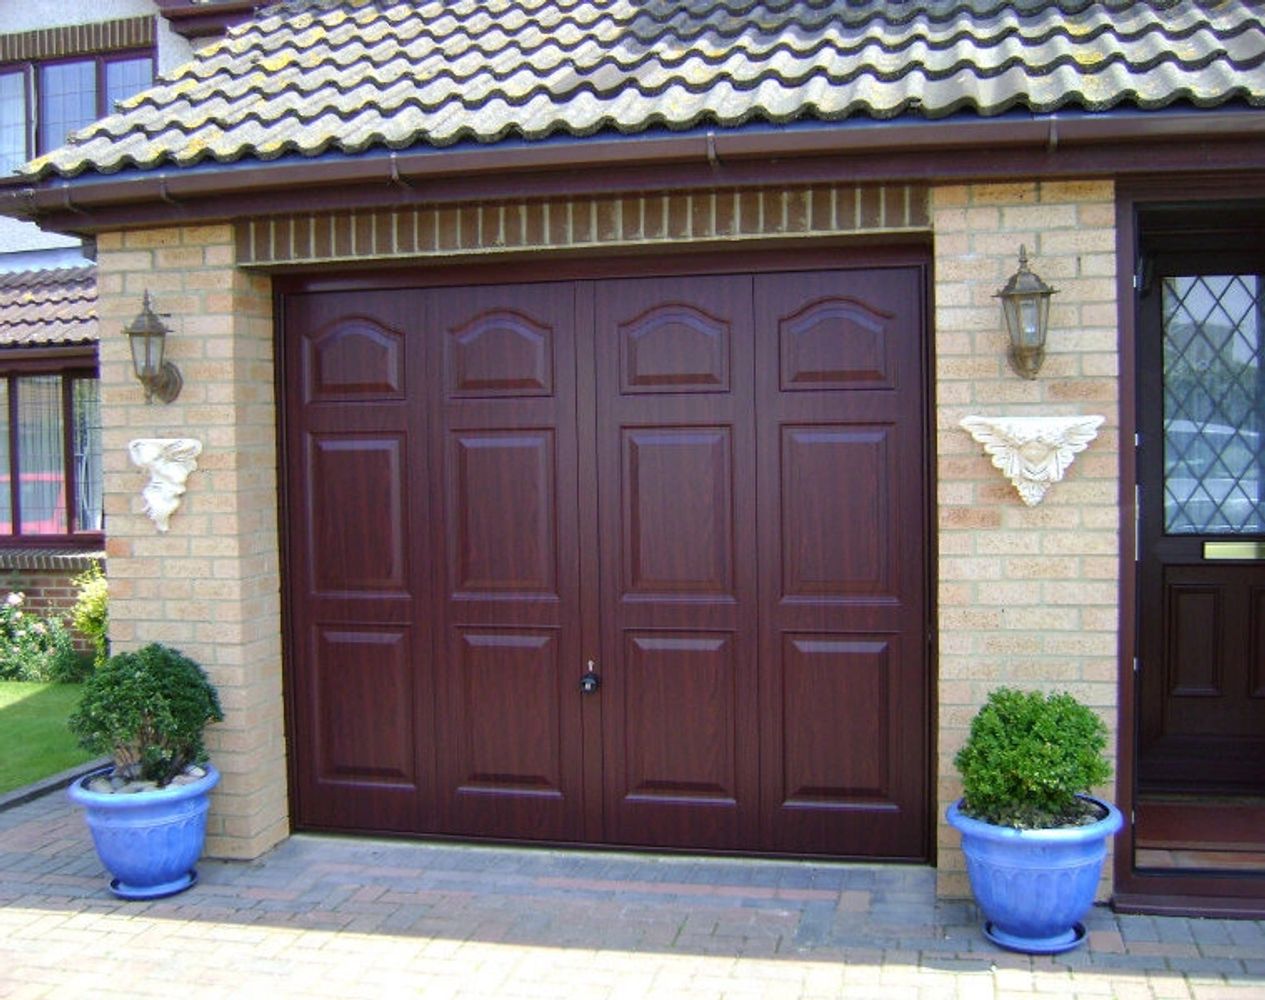 An example of a garage door we fitted in the past.